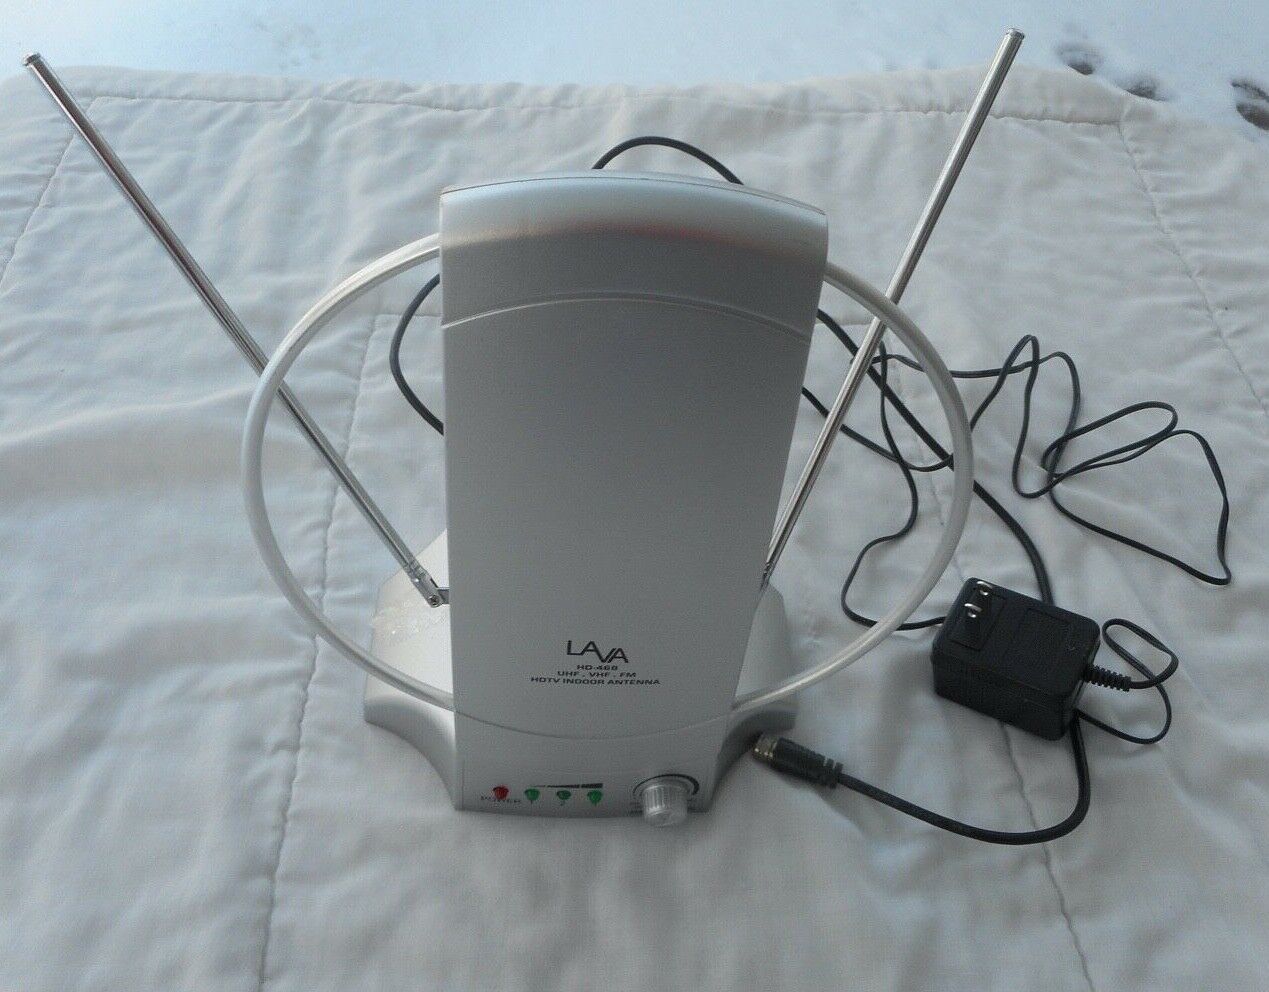 HD-468 baby-boomers-attic-of-stuff LAVA HD-468 HDTV High Definition Indoor Amplified Antenna~4K Ready~Tested Works 